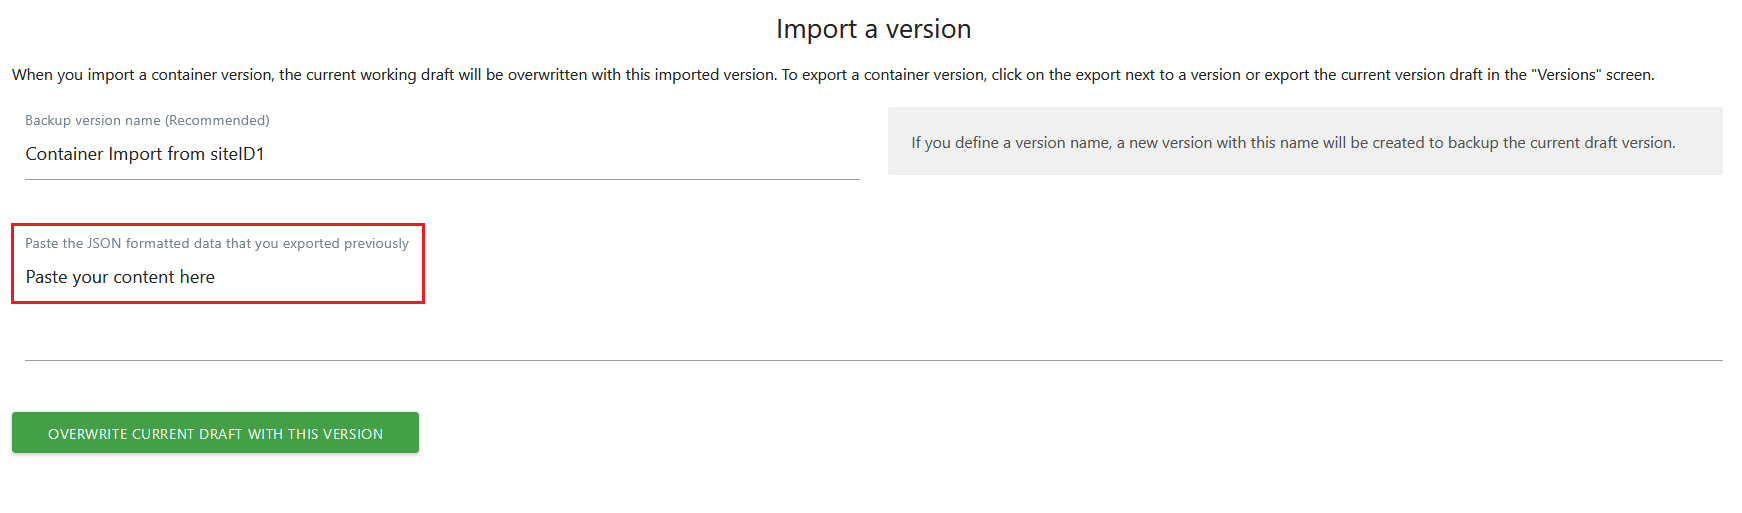 tag manager import